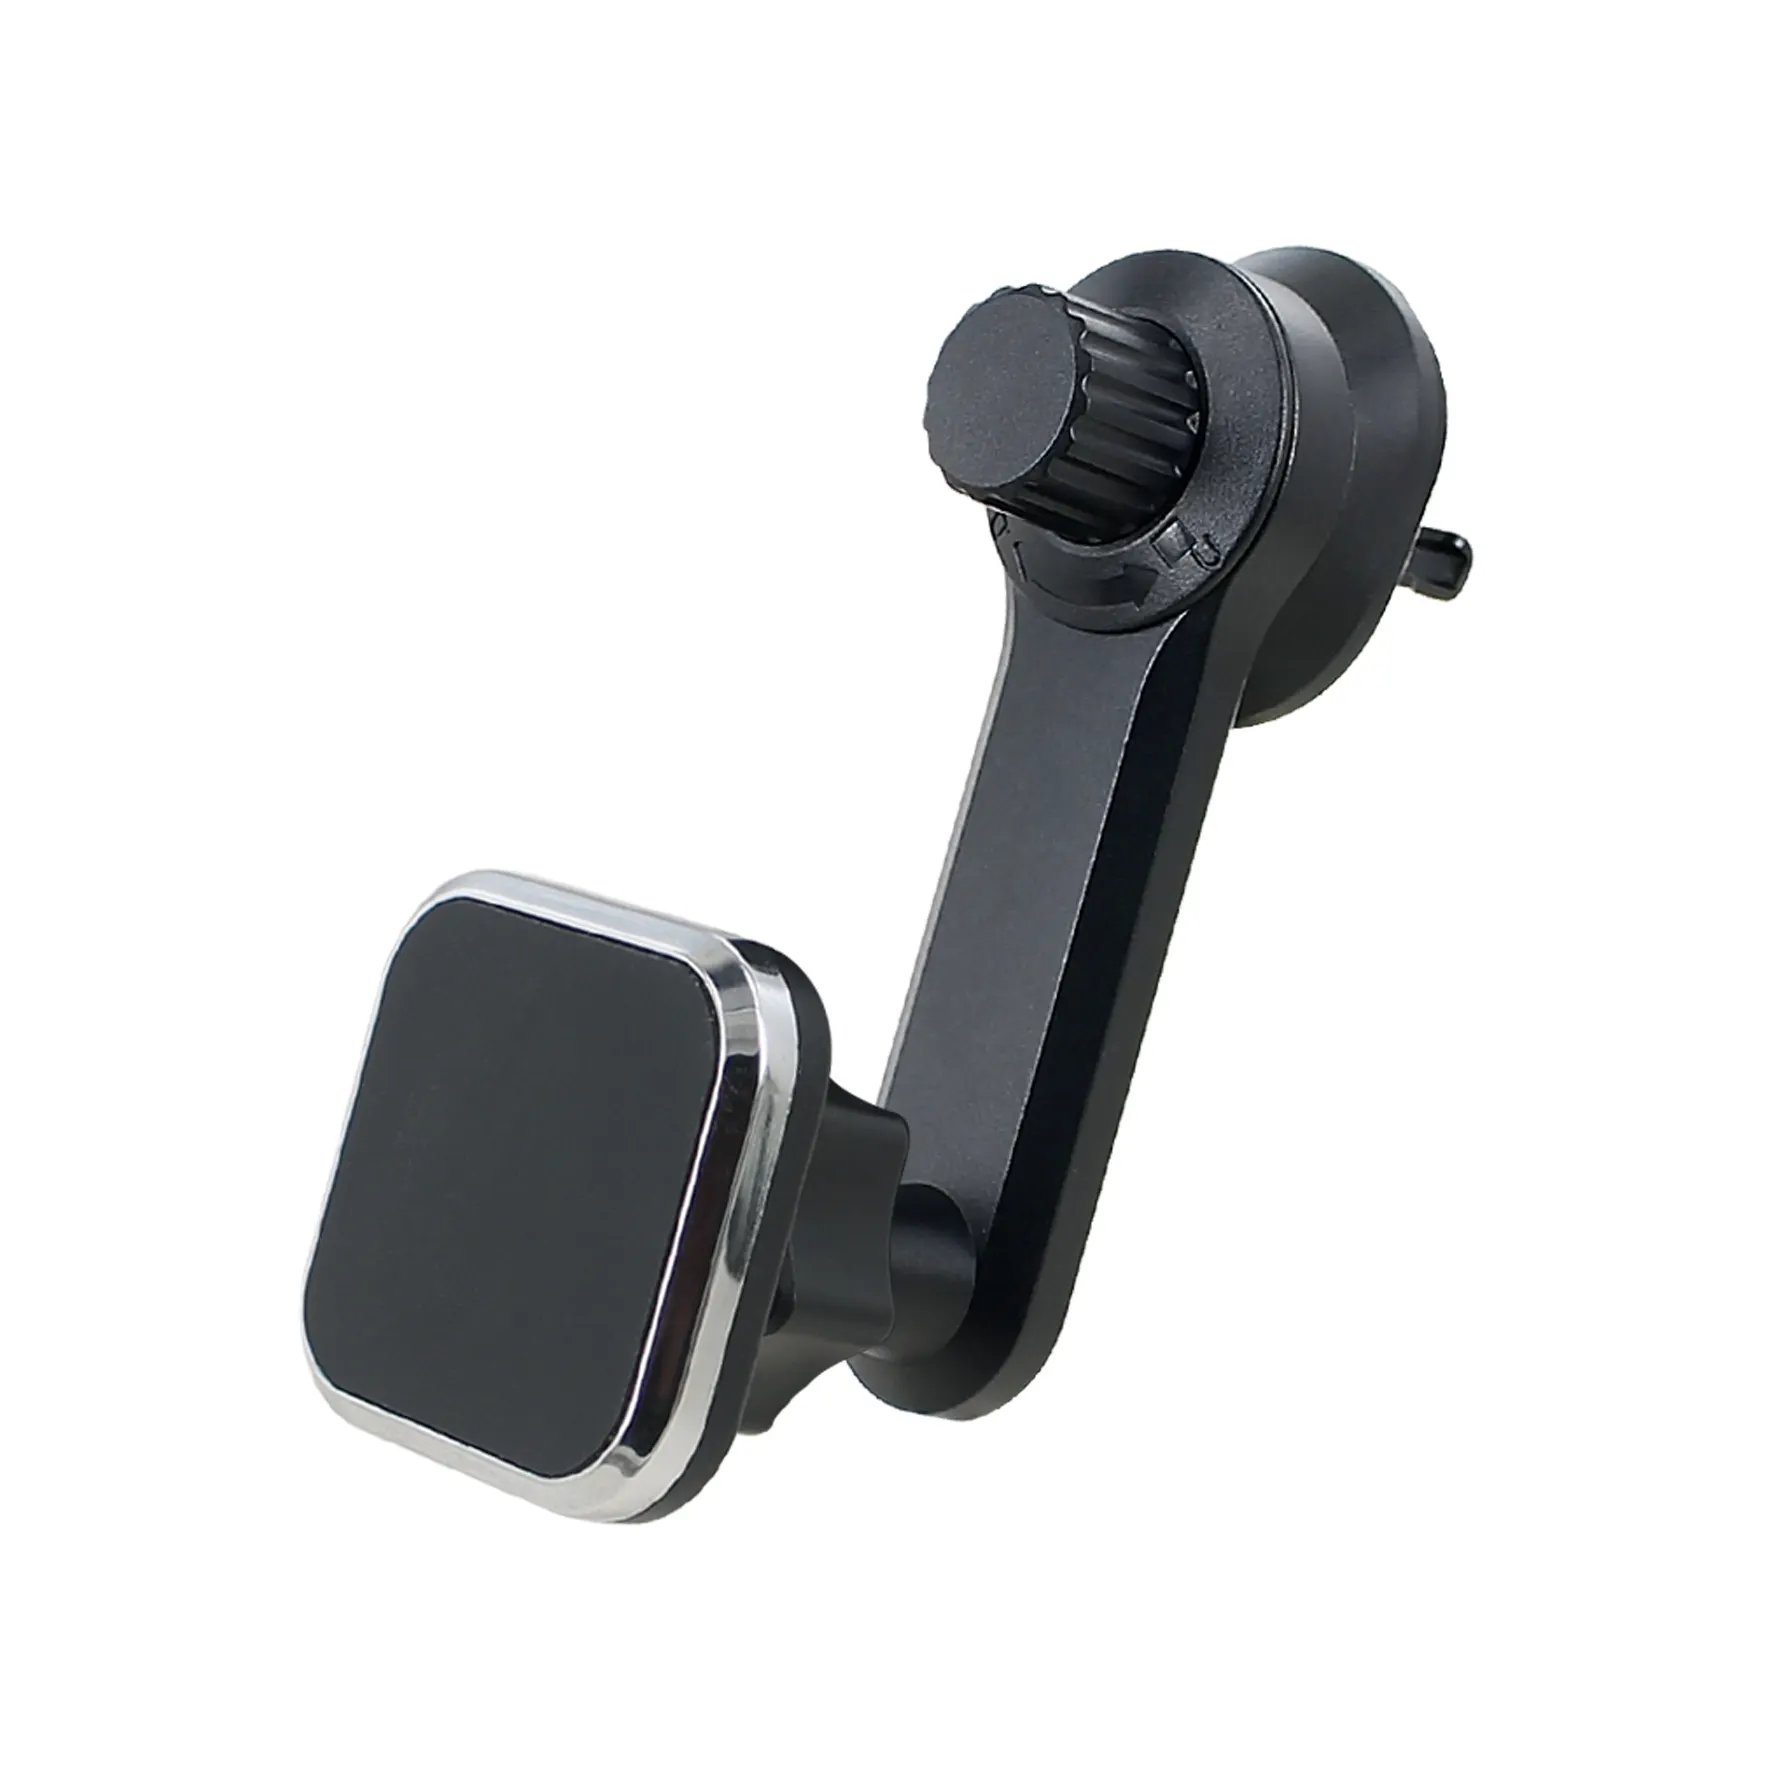 Portable Strong Magnetic Mobile Phone Stand Car Air Vent Mount Holder For Phone